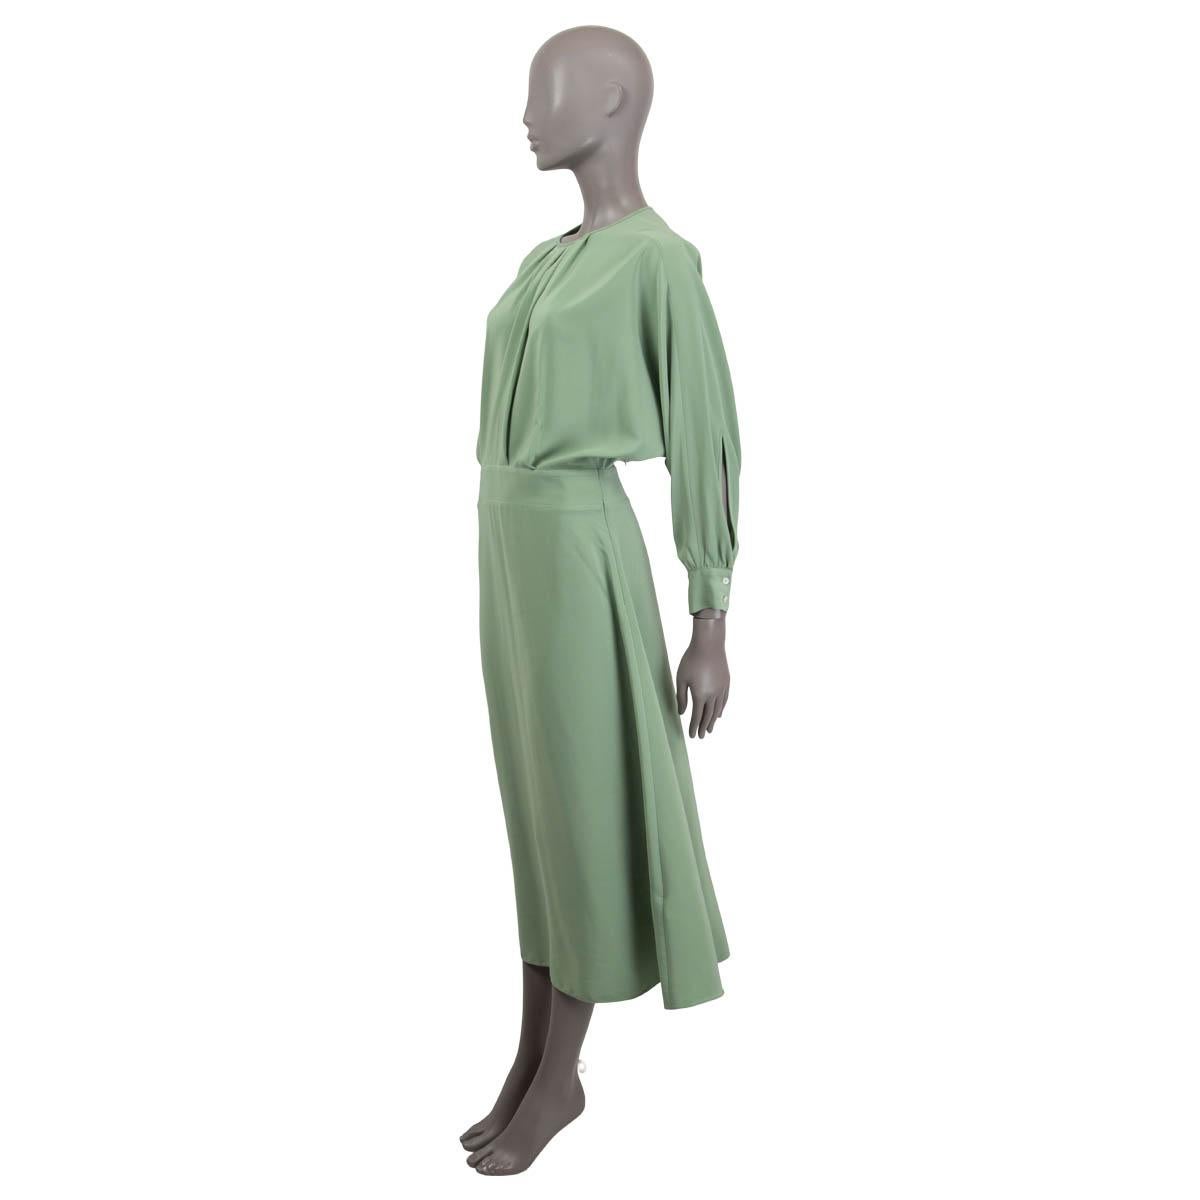 100% authentic Victoria Victoria Beckham pleated midi dress in light green polyester (64%) and viscose (36%). Features long raglan dolman sleeves (sleeve measurements taken from the neck) and buttoned cuffs. Opens with a hook at the back and zipper